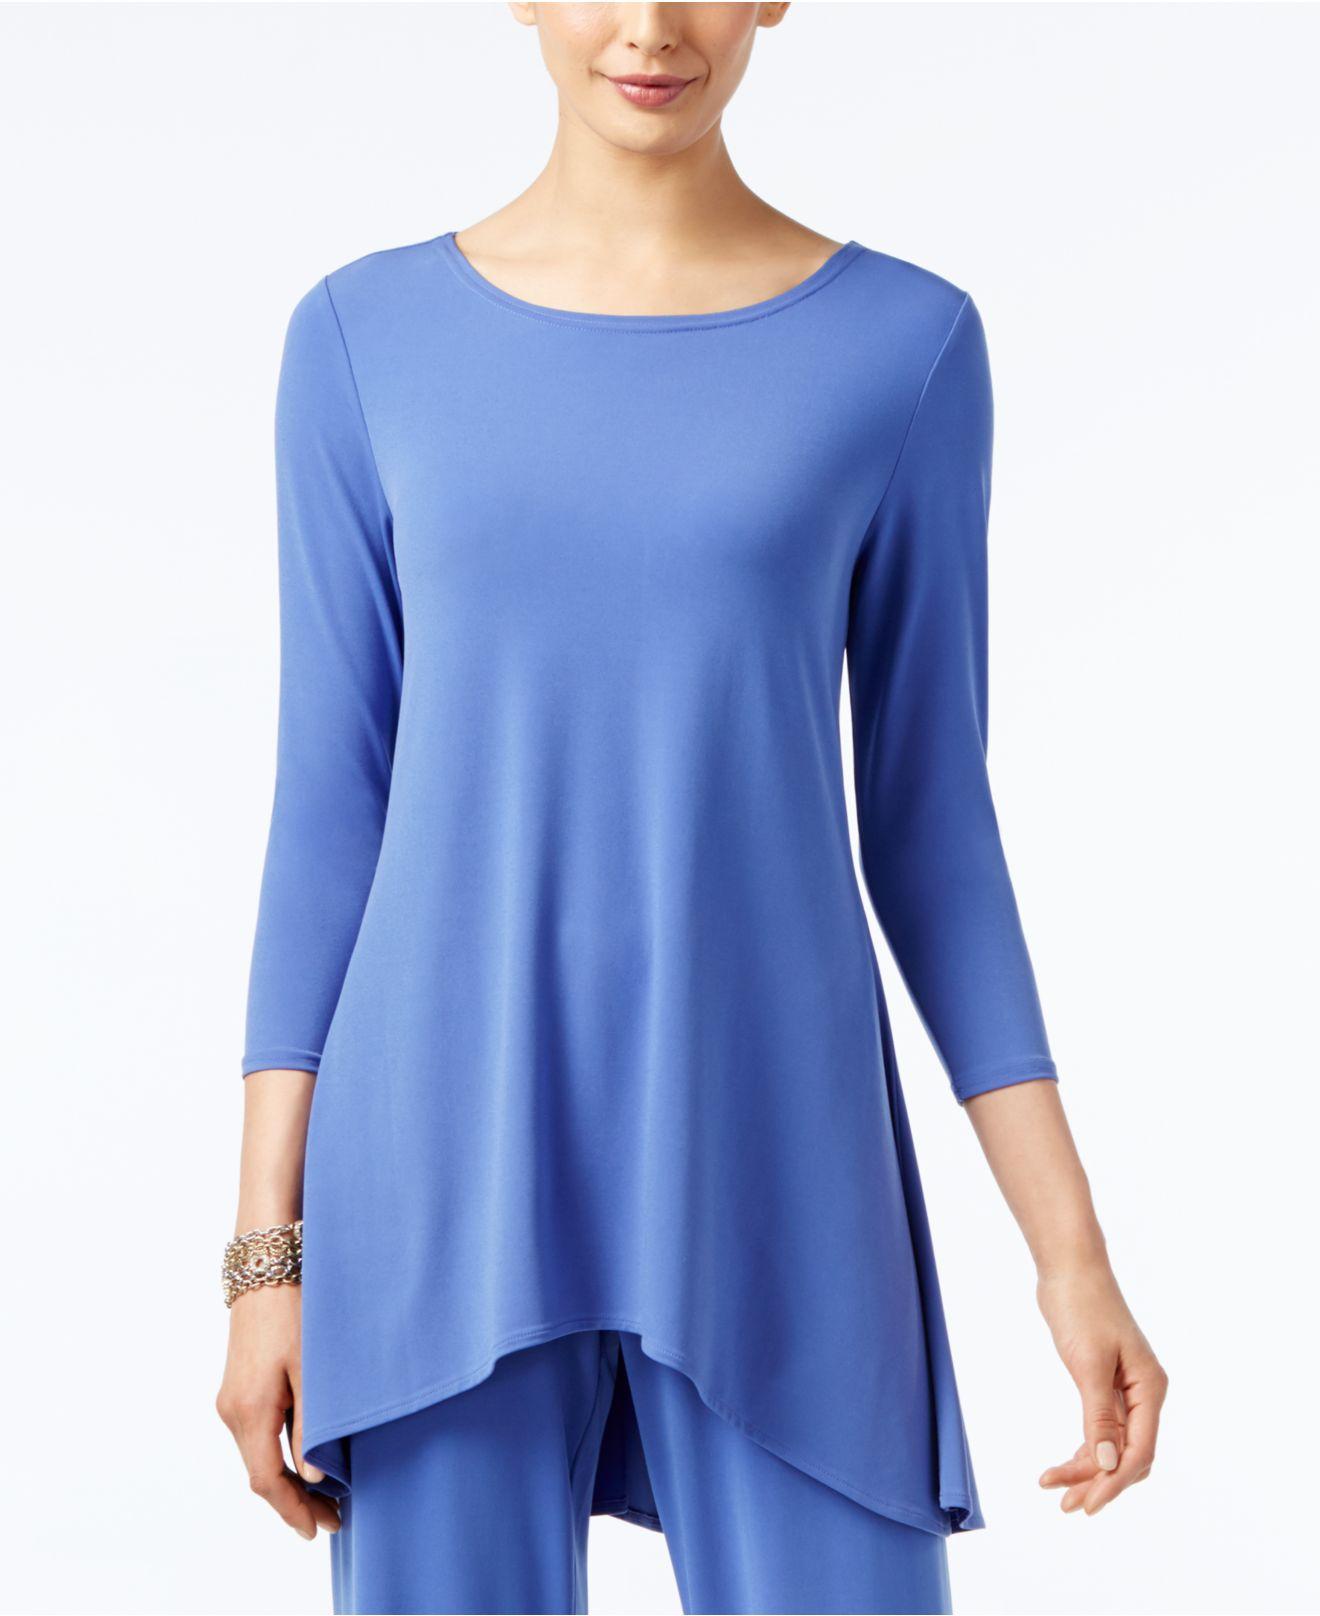 High low tunic tops